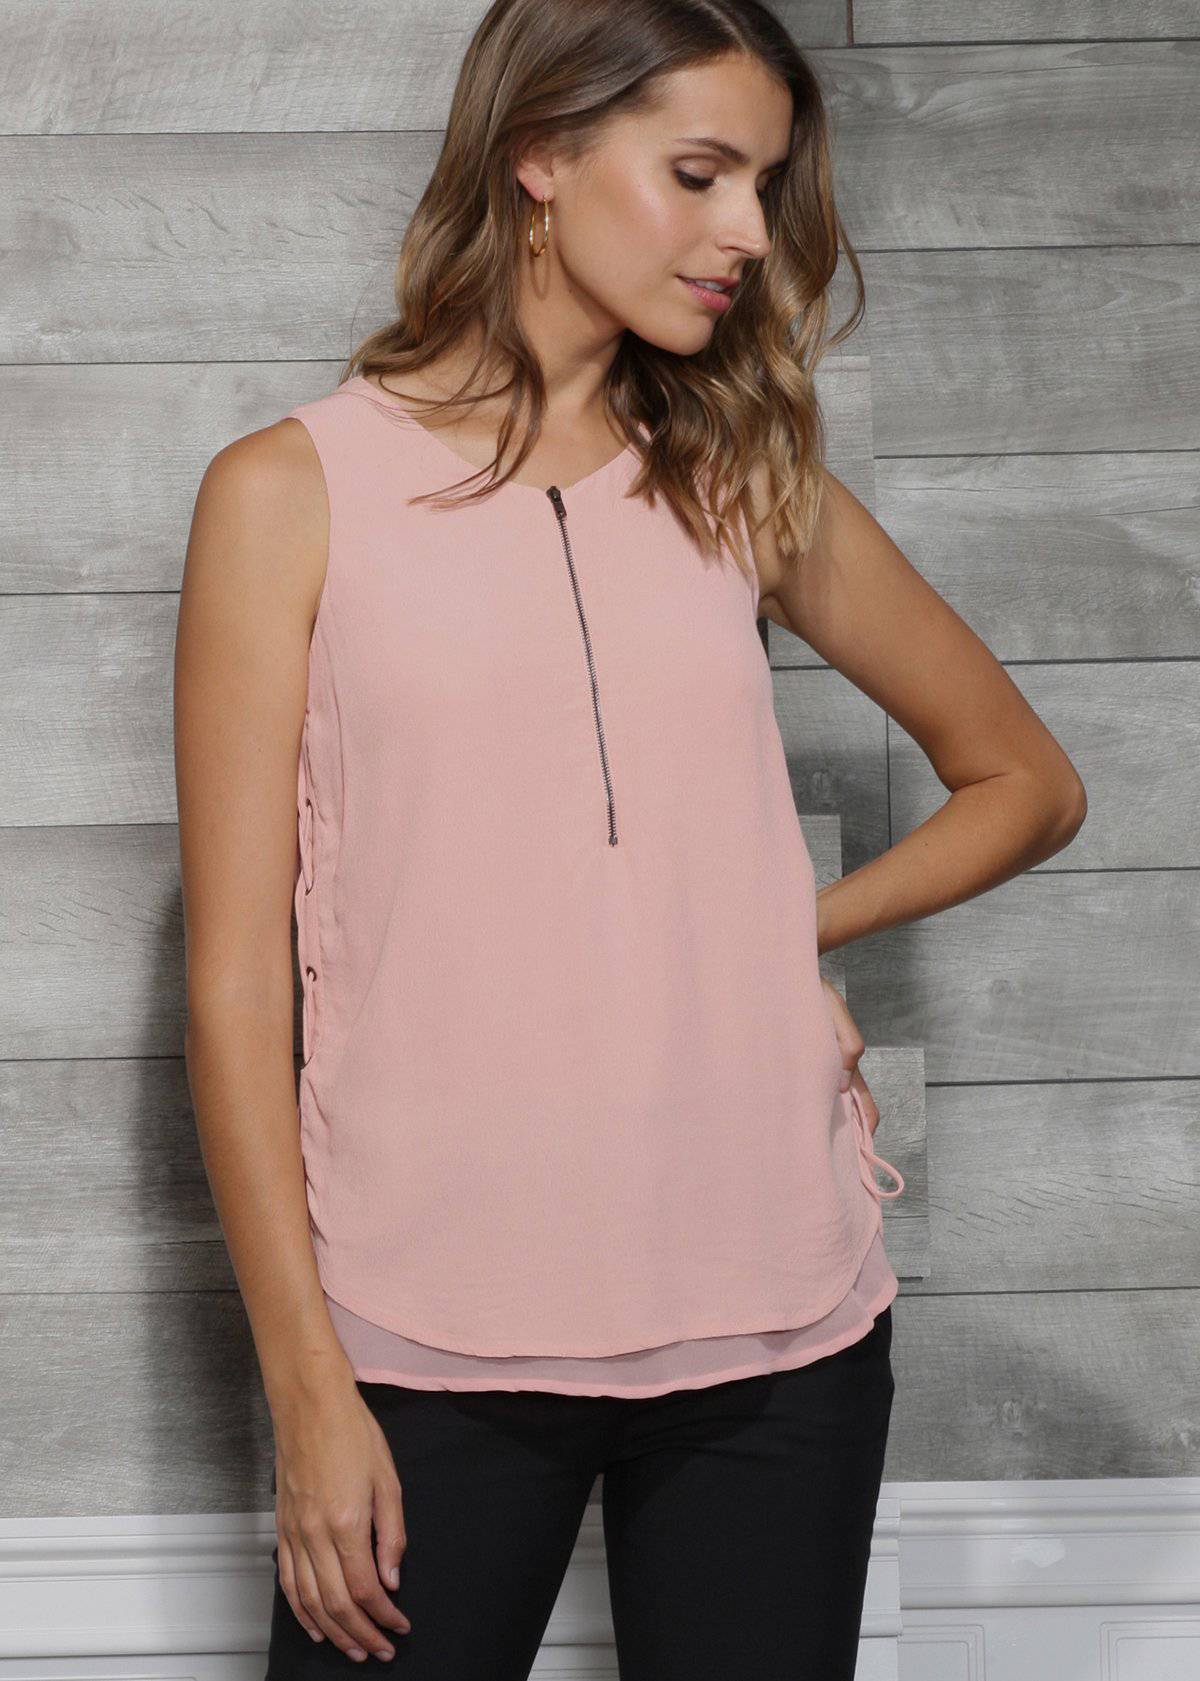 Women's Sleeveless Side Tie Blouse In Peach Apricot by Shop at Konus